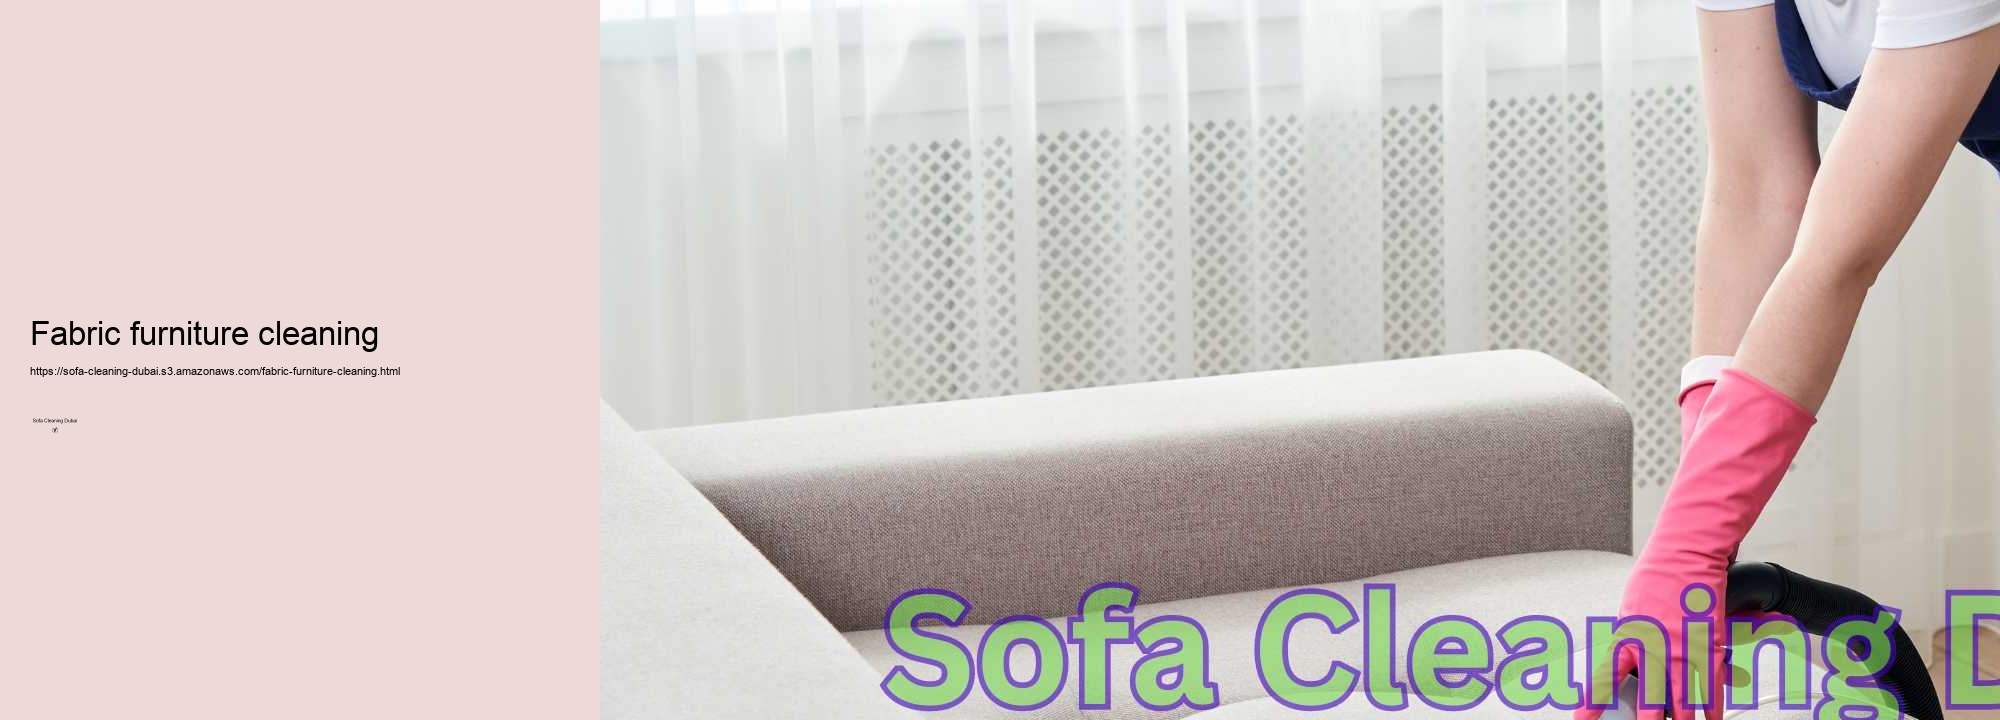 Fabric furniture cleaning